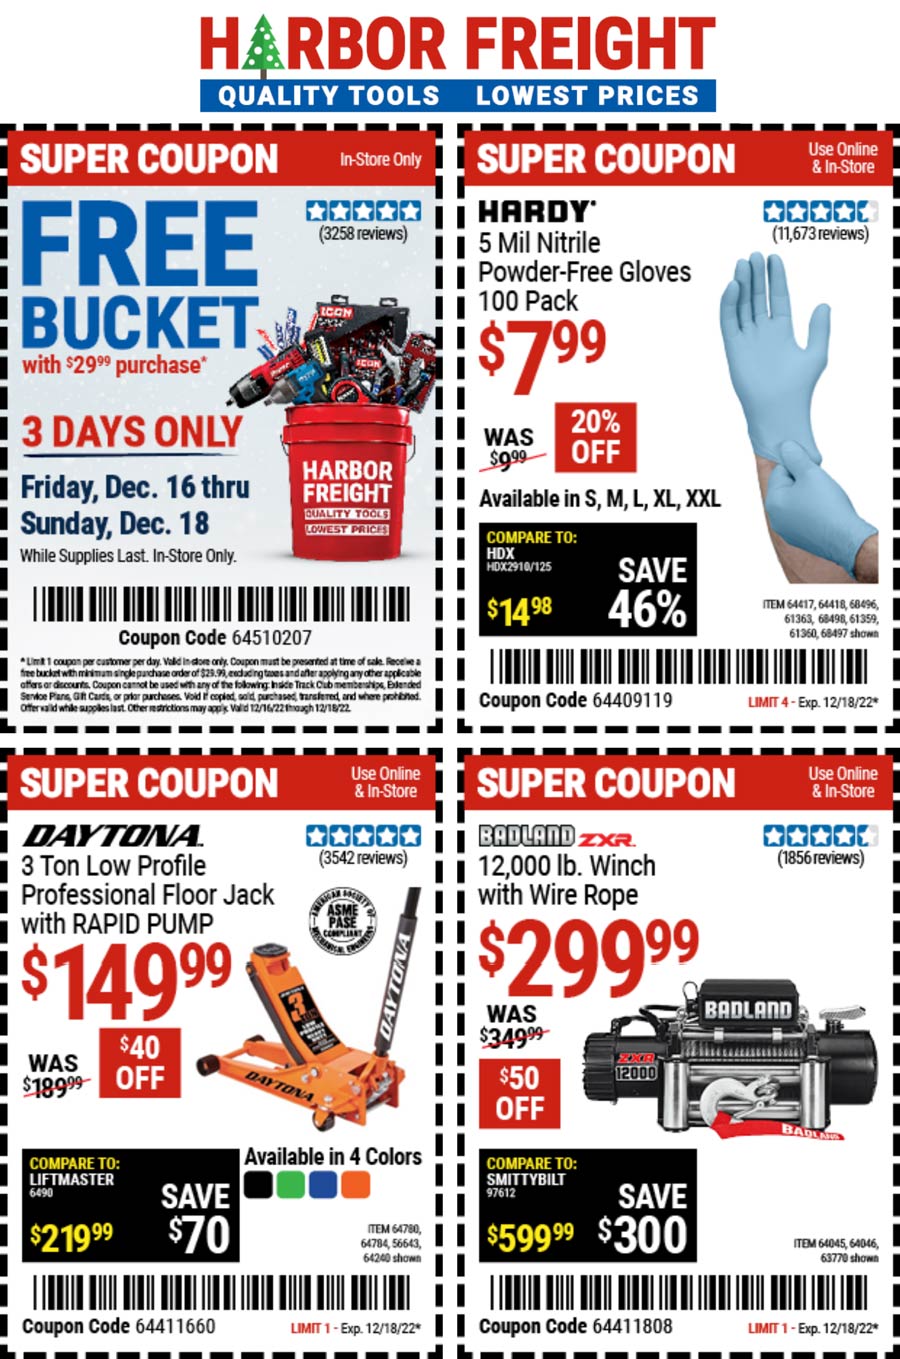 Harbor Freight stores Coupon  Free bucket on $30 at Harbor Freight Tools #harborfreight 